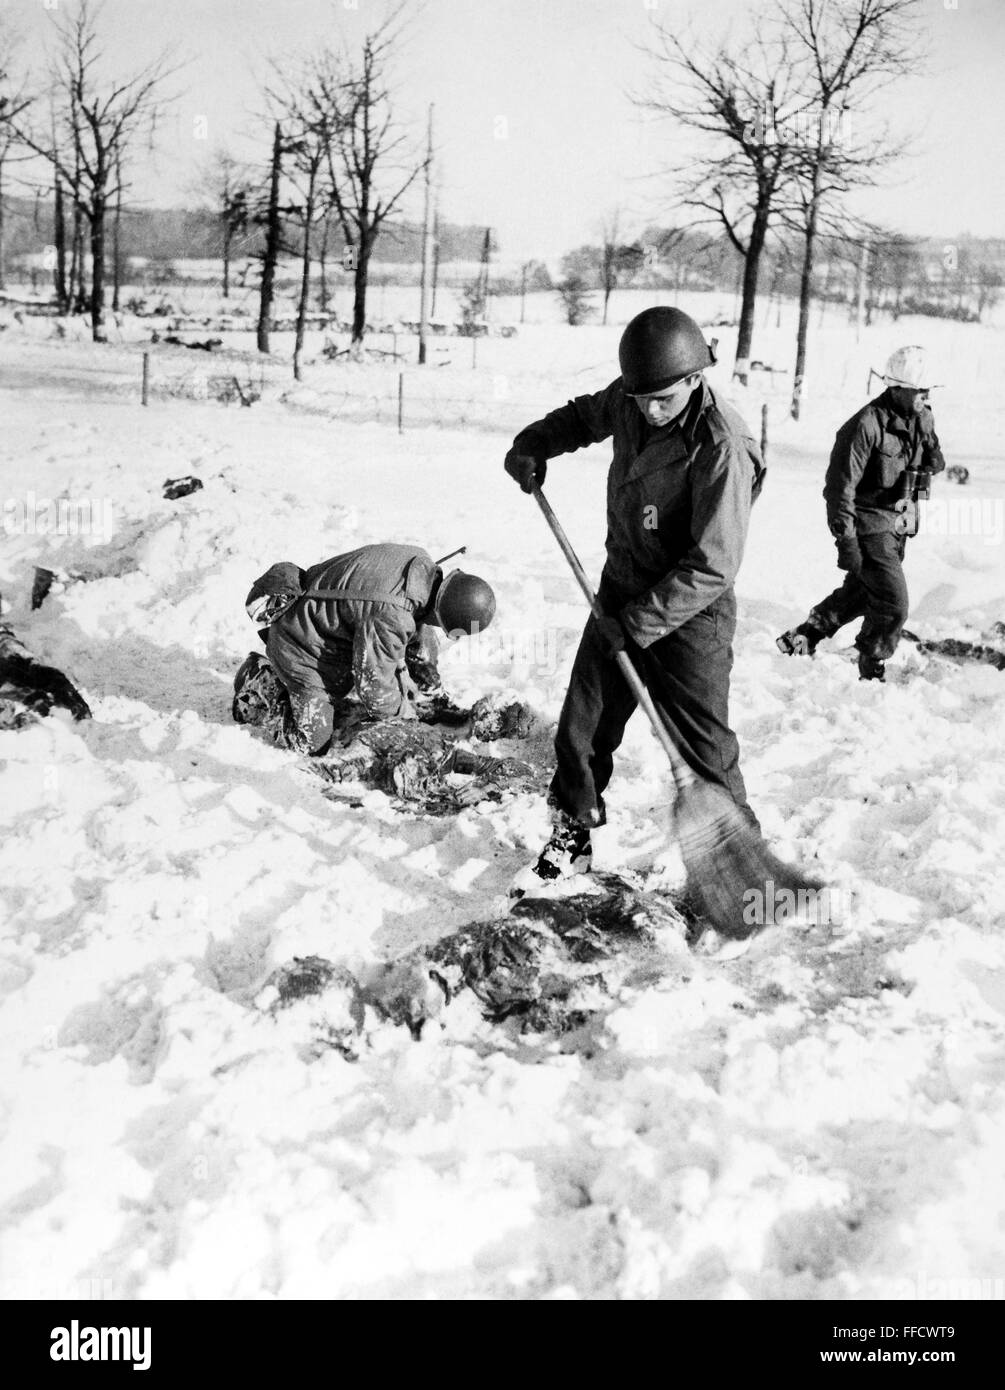 MALMEDY MASSACRE, 1944. /nAmerican soldiers recovering the bodies of their comrades in a snow-covered field after they were massacred by German Waffen-SS soldiers near Malmedy, Belgium, during World War II, December 1944. Stock Photo